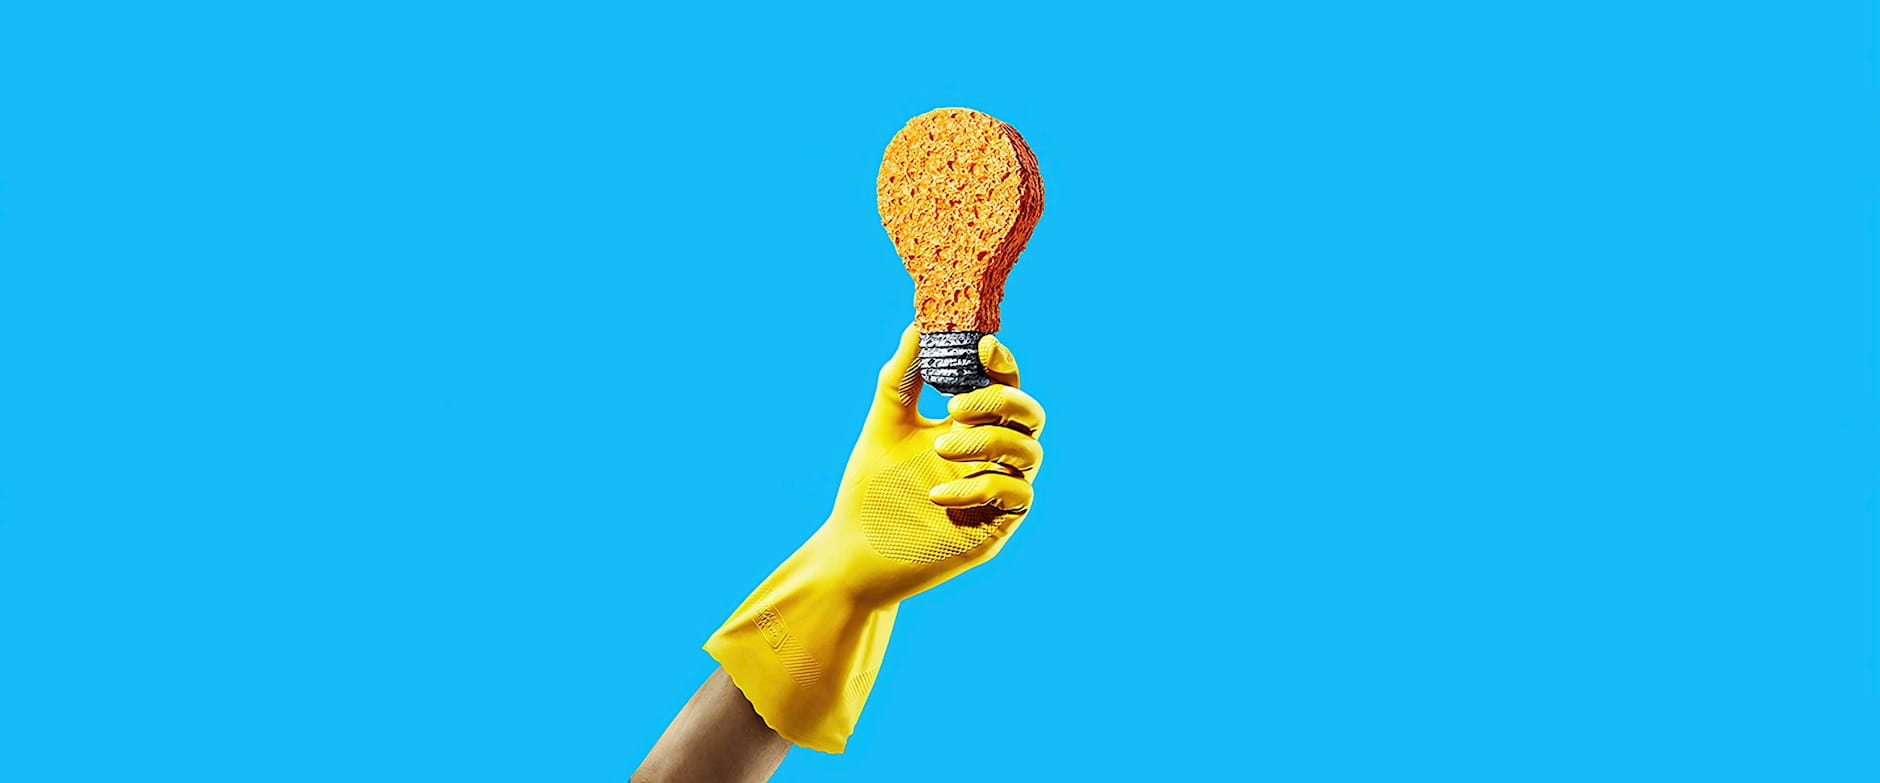 Hand in a dish washing glove holding up a lightbulb shaped sponge